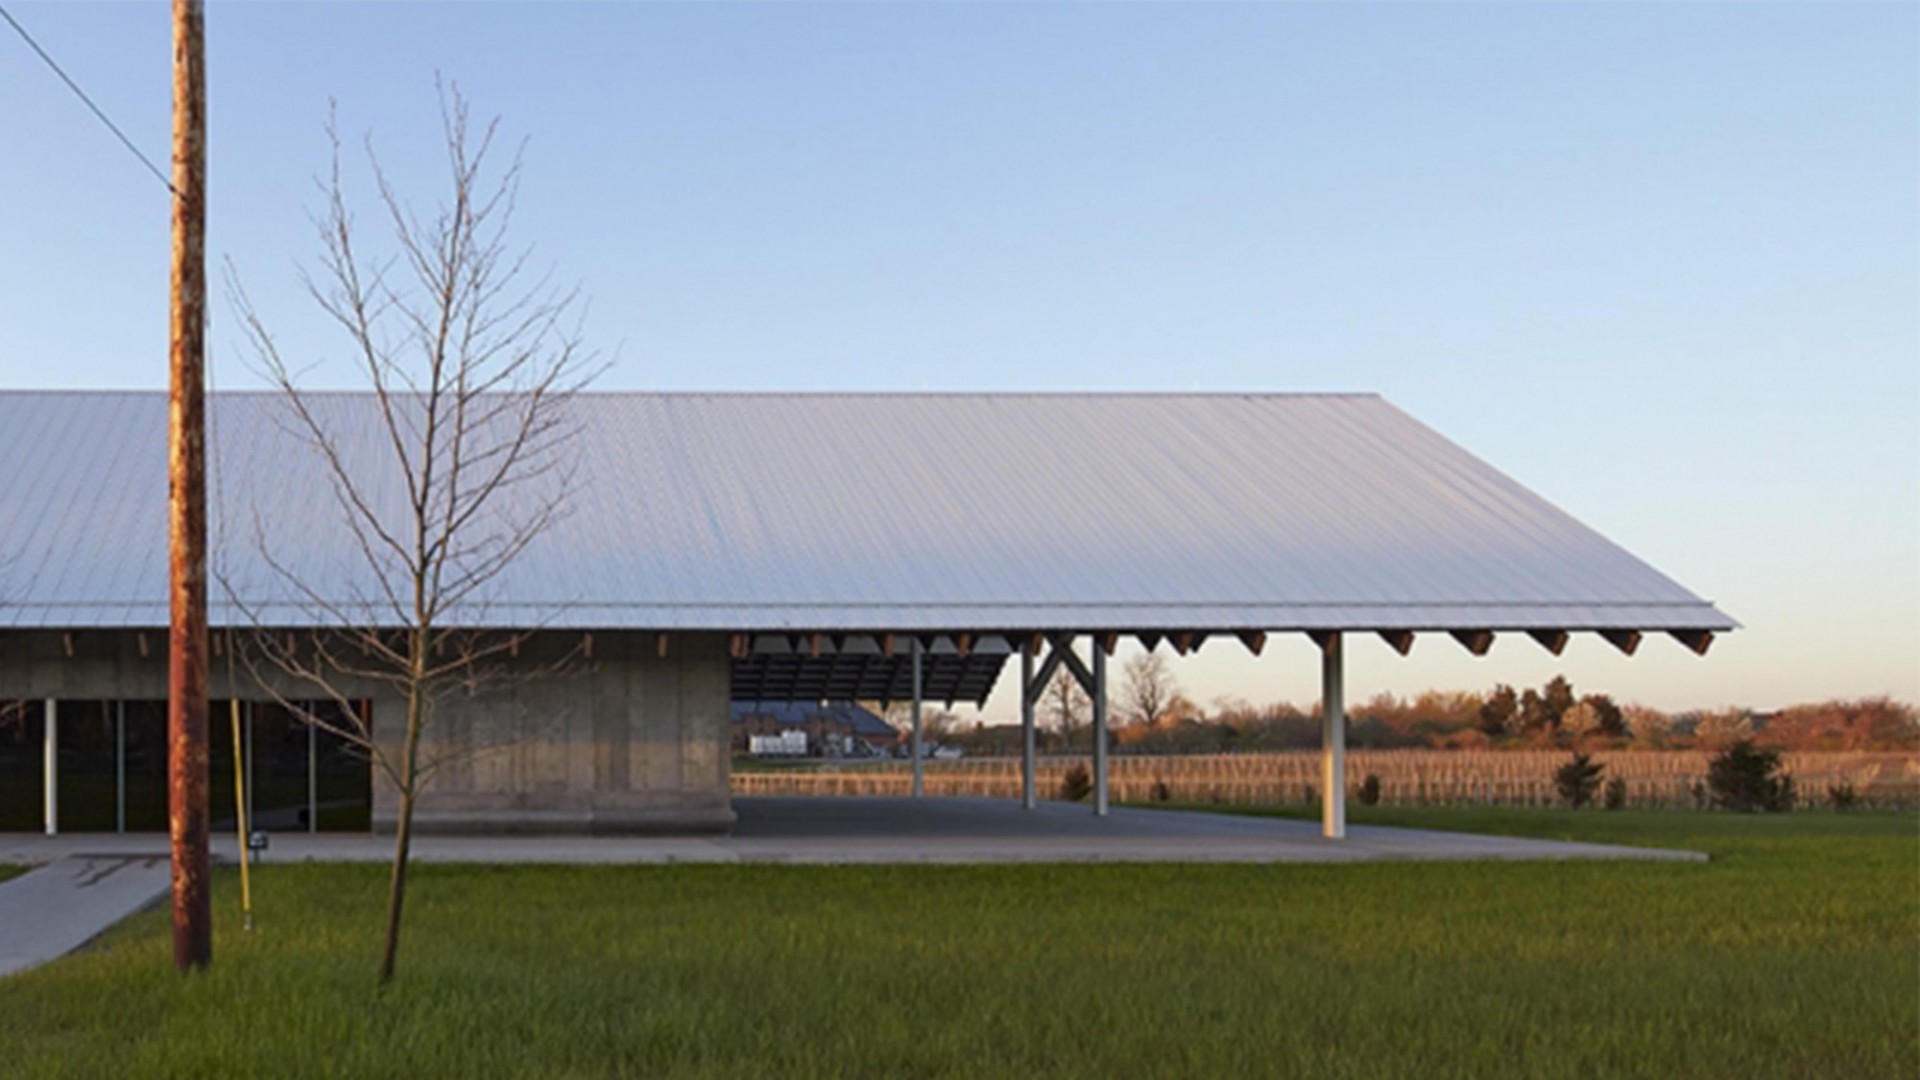 Parrish Art Museum in Water Mill, New York